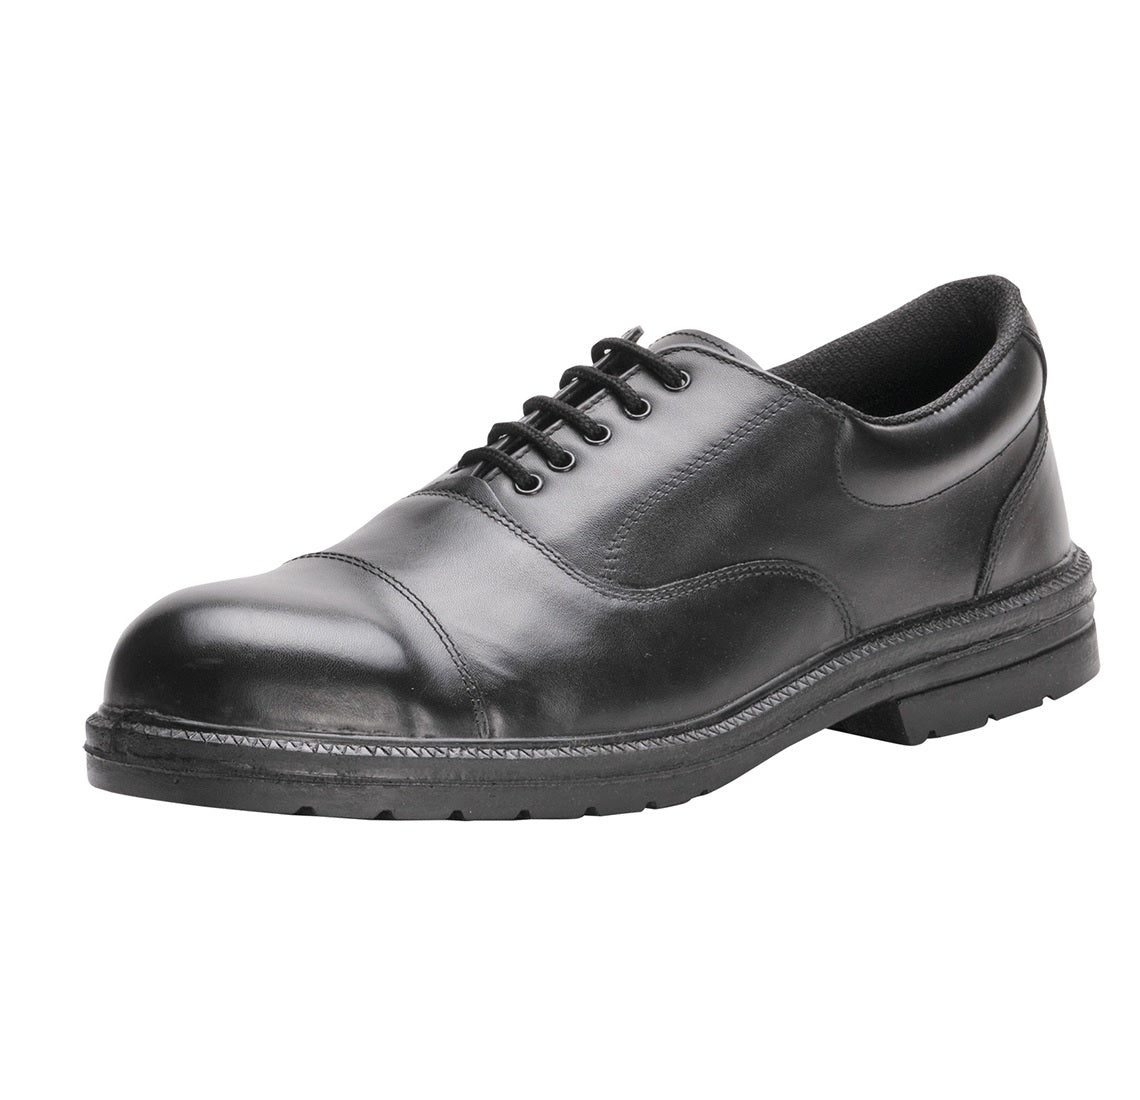 Portwest Executive Oxford Black Shoes with Steel Toe Cap - FW47